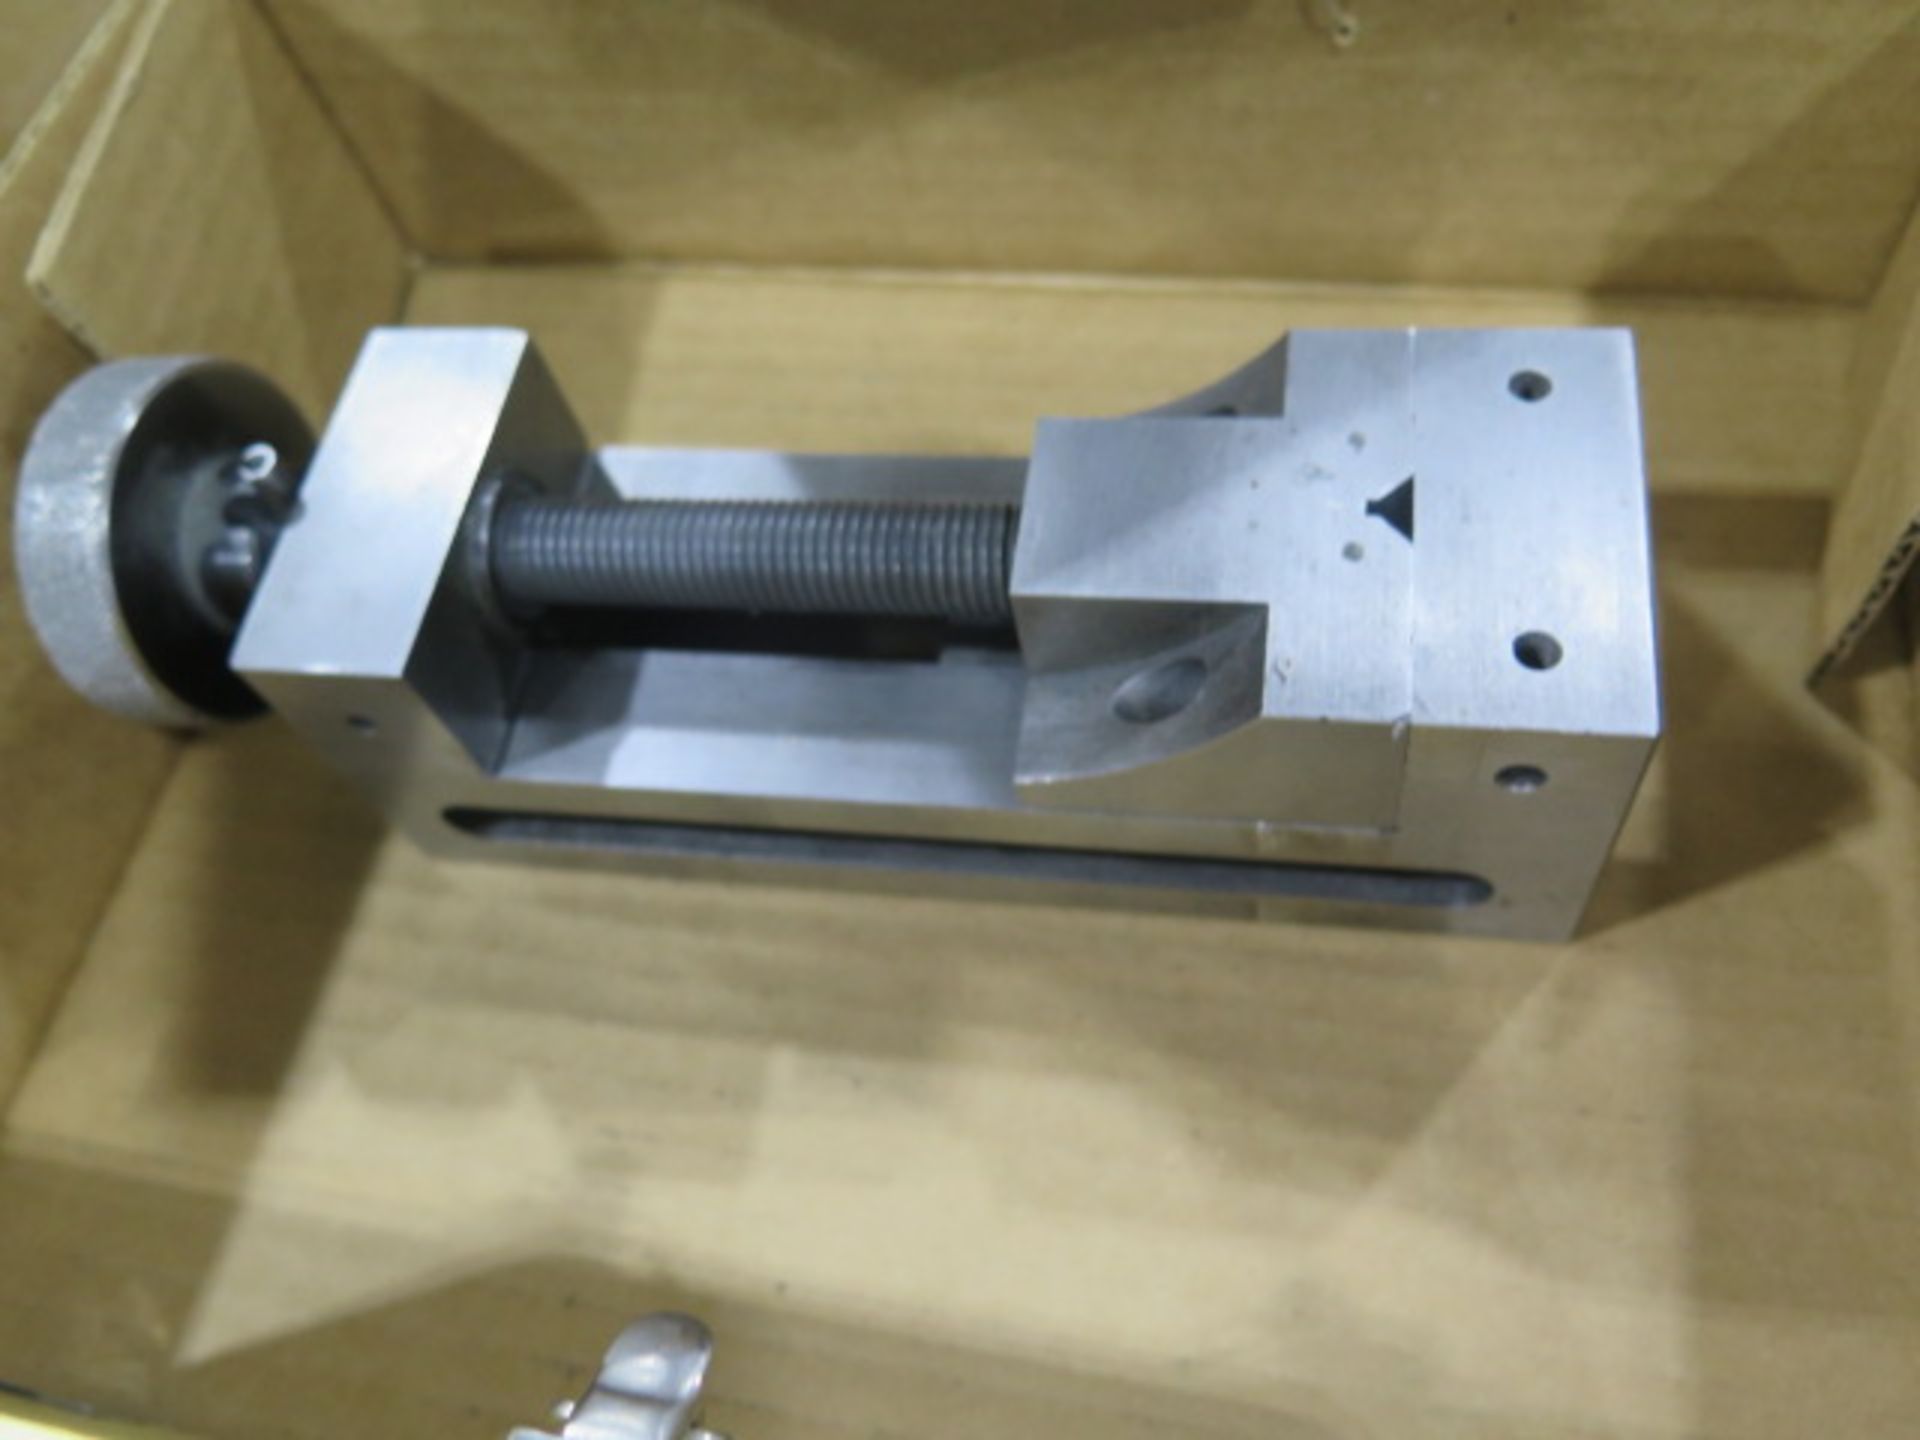 2 3/4" Precision Sine Vise and 2 1/4" Machine Vise (SOLD AS-IS - NO WARRANTY) - Image 7 of 7